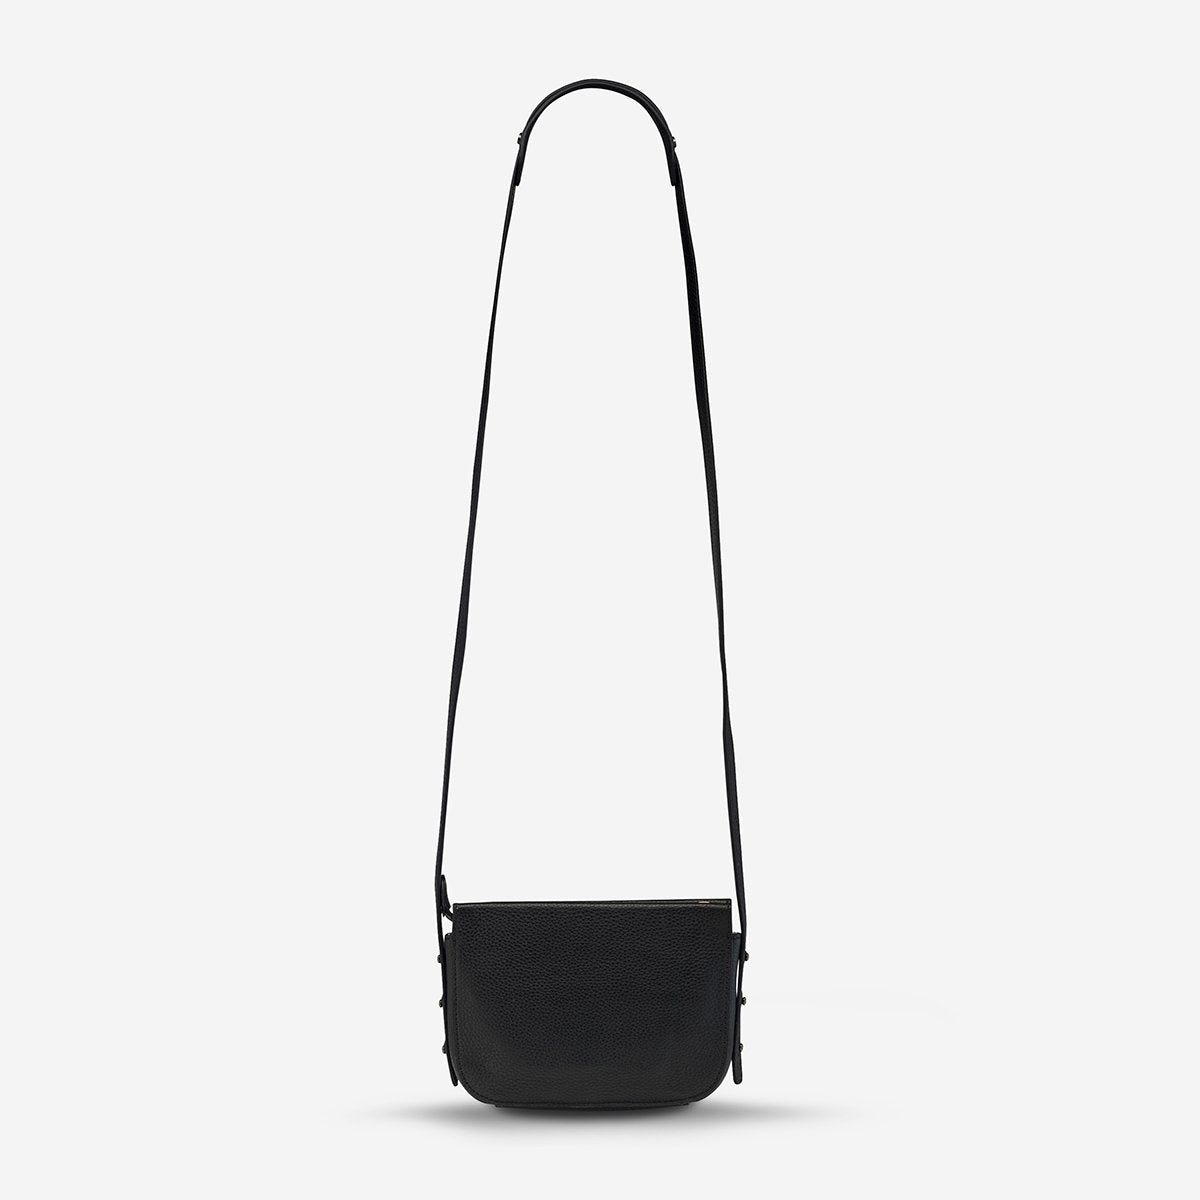 status anxiety black leather crossbody bag in her command  back hanging hunterminx